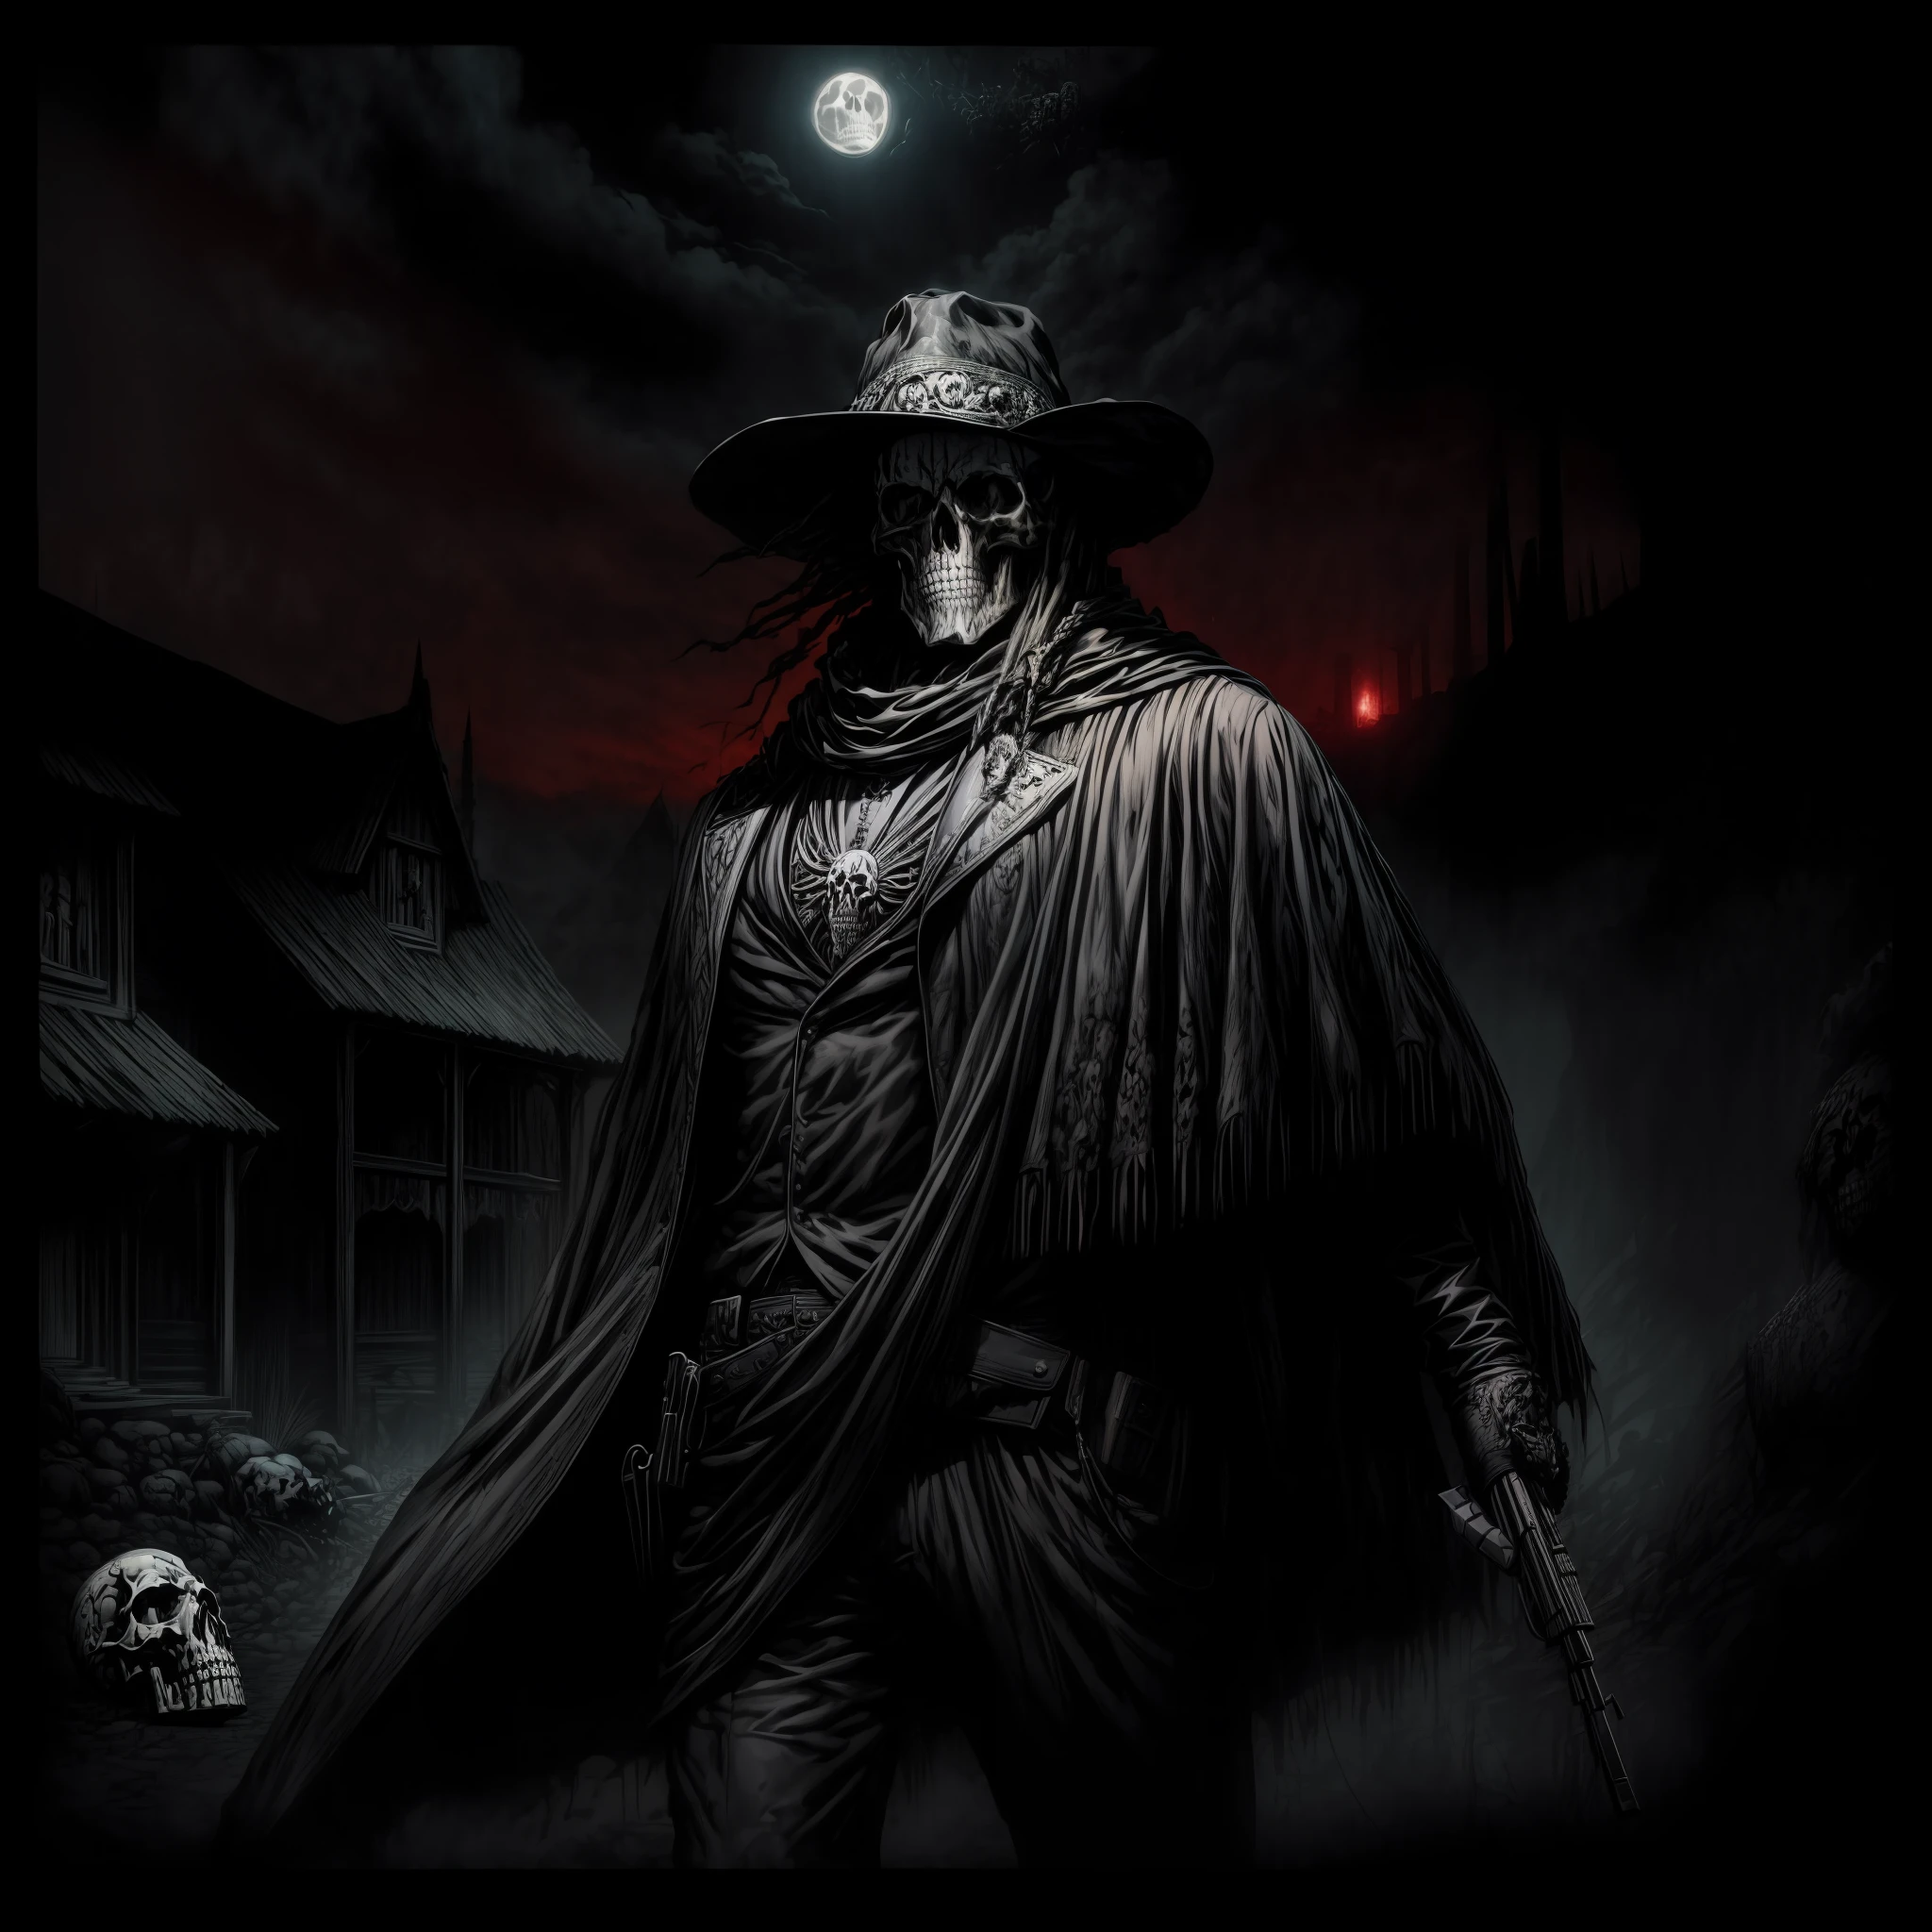 Dark Country album cover, with a skull-faced man in the moonlight holding an art-style pistol of engraving, monochrome, cool colors. artistic style of engraving, cool colors. lineart, monochrome, dread, gothic, horror, surreal, terror, fear, despair, monstrous humanoid, fantasy, dreamlike, dramatic